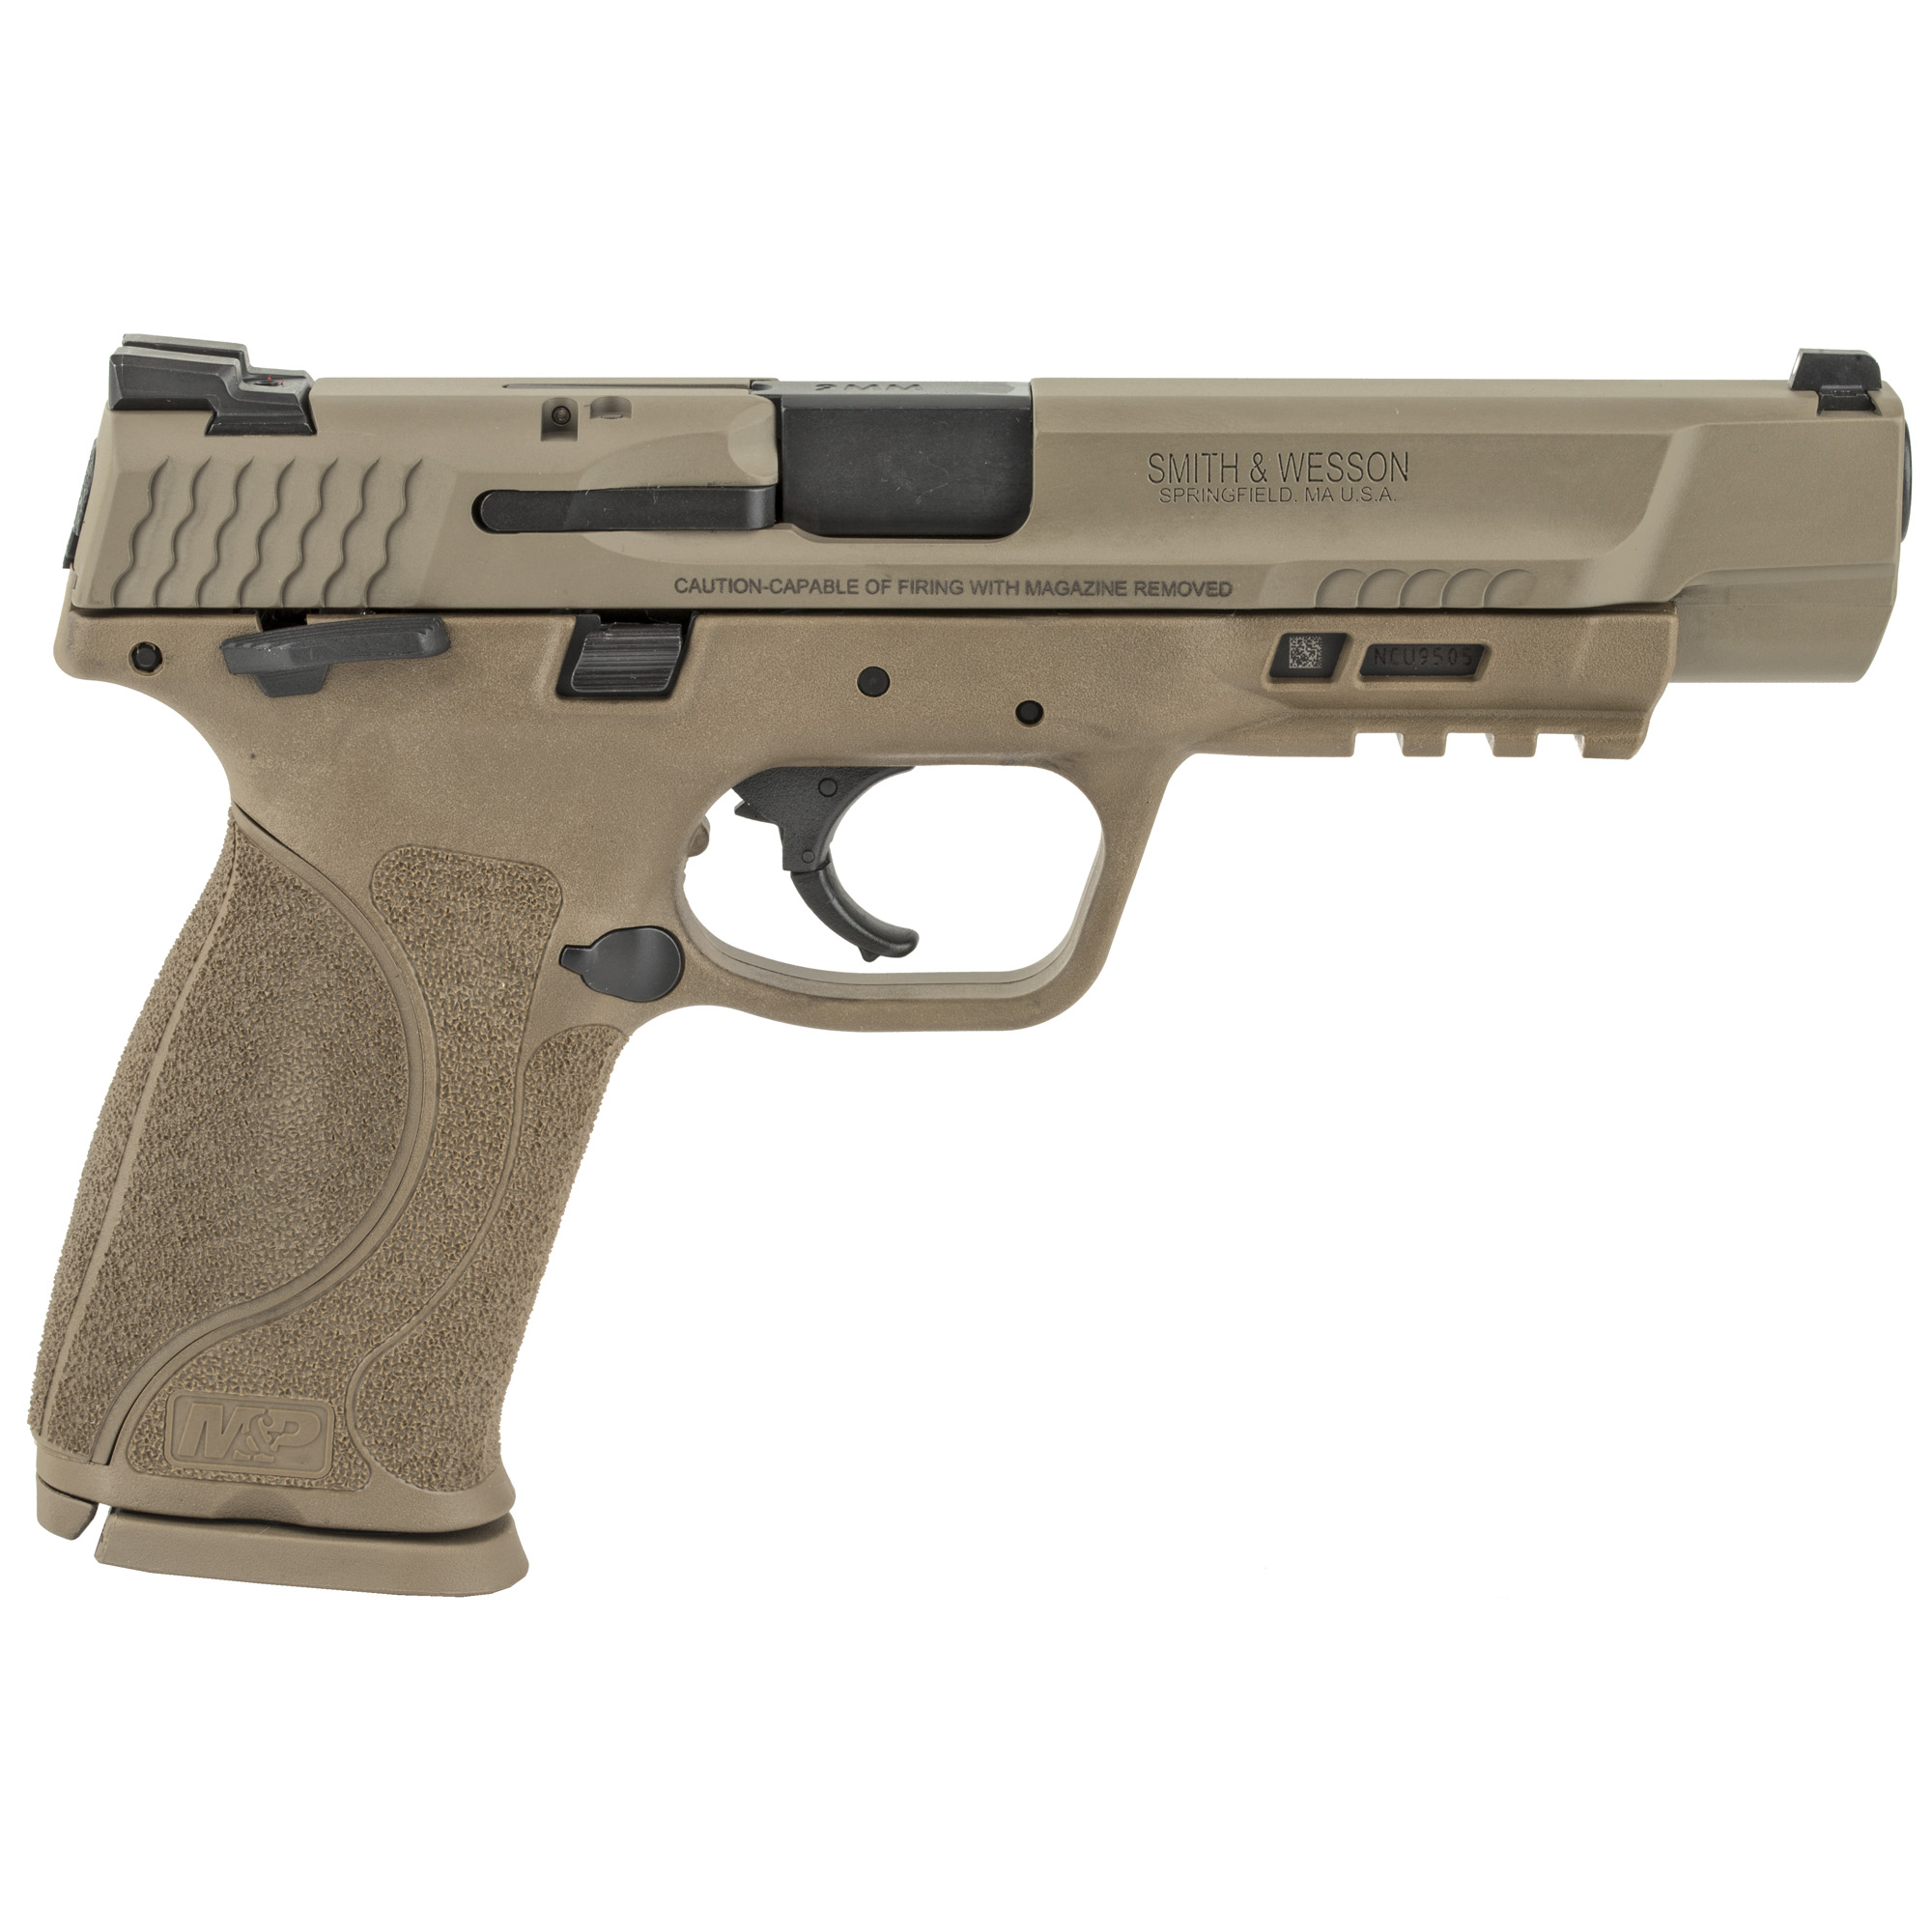 Smith & Wesson, M&P 2.0, Striker Fired, Semi-automatic, Polymer Frame Pistol, Full Size, 9MM, 5" Barrel, Armornite Finish, Flat Dark Earth, 3 Dot Sights, Manual Thumb Safety, 17 Rounds, 2 Magazines